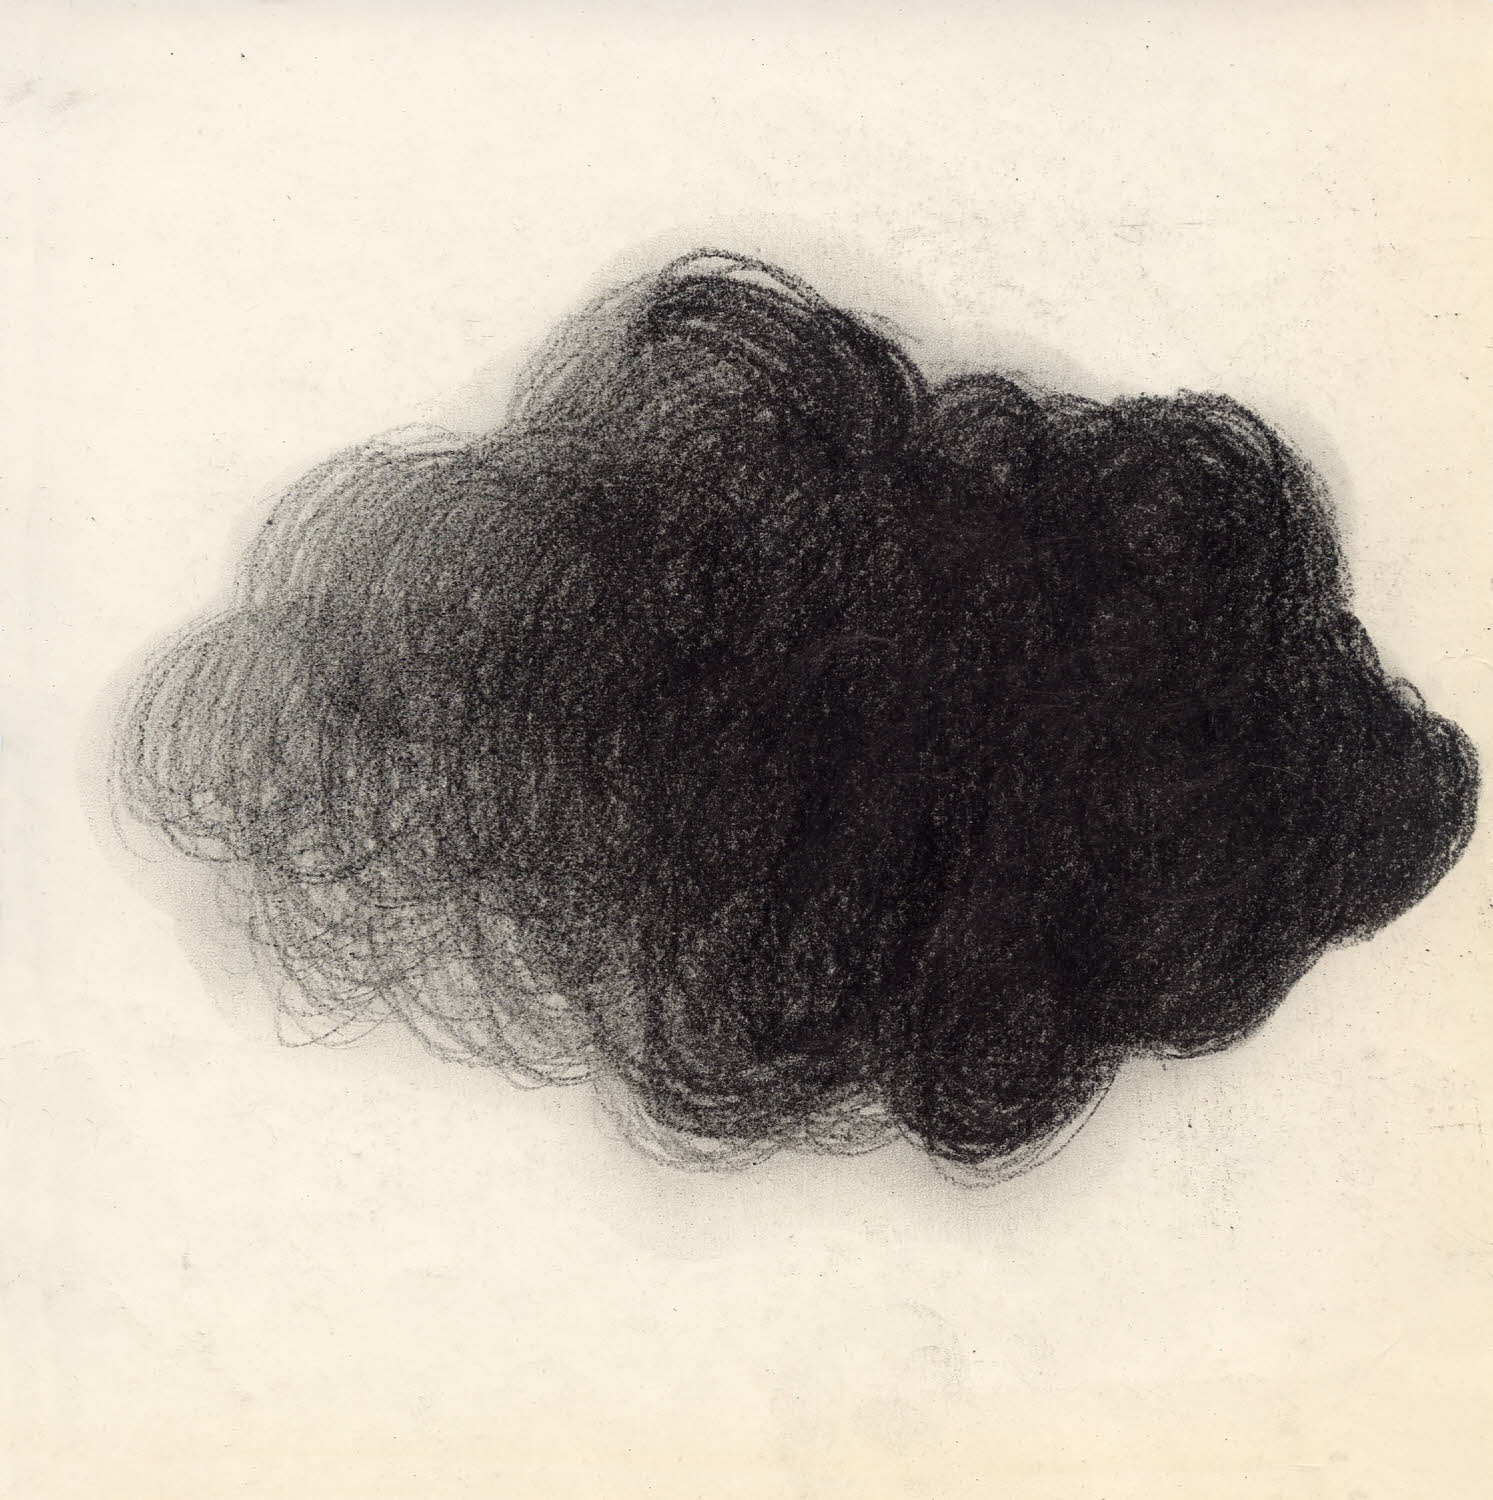 Shade, 2005, graphite on texture paper, 7.5x7.5 inches